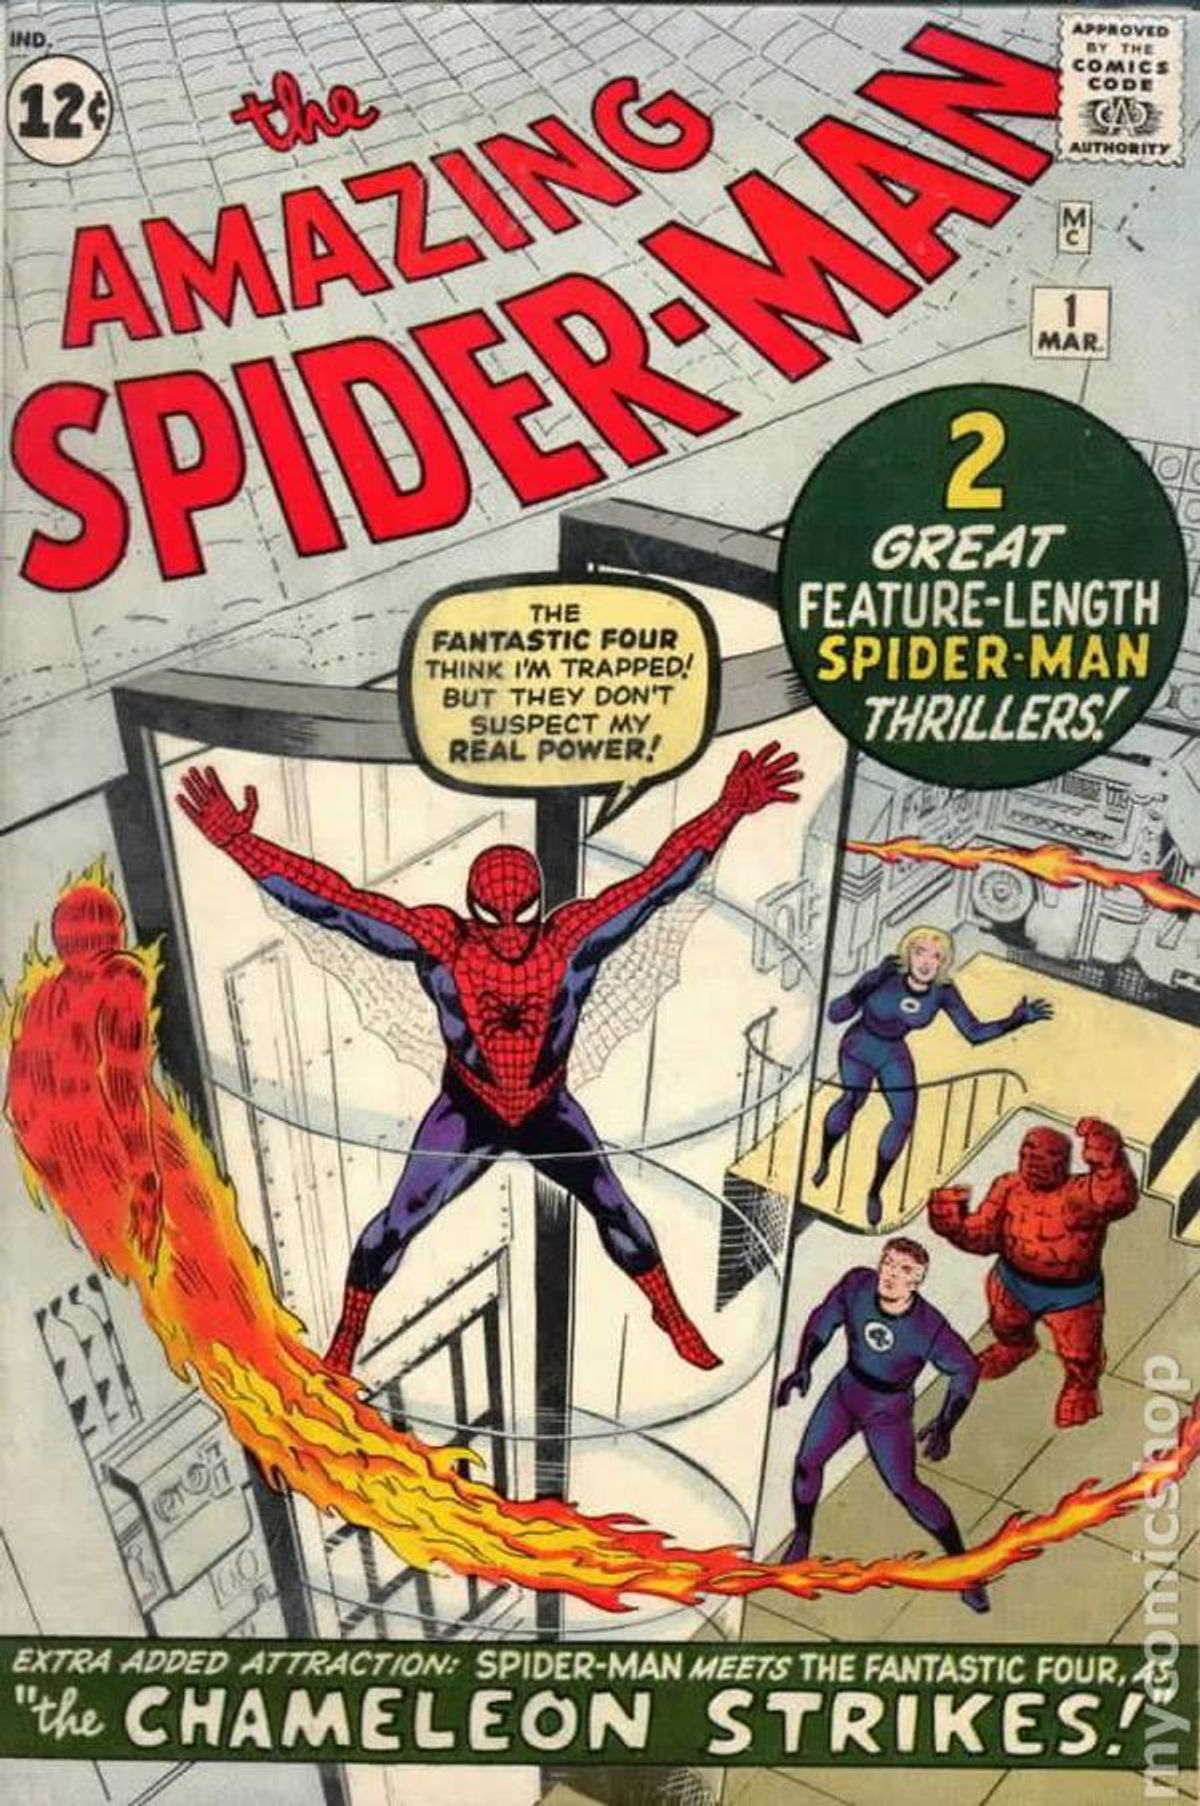 The History Of Spider-Man #2